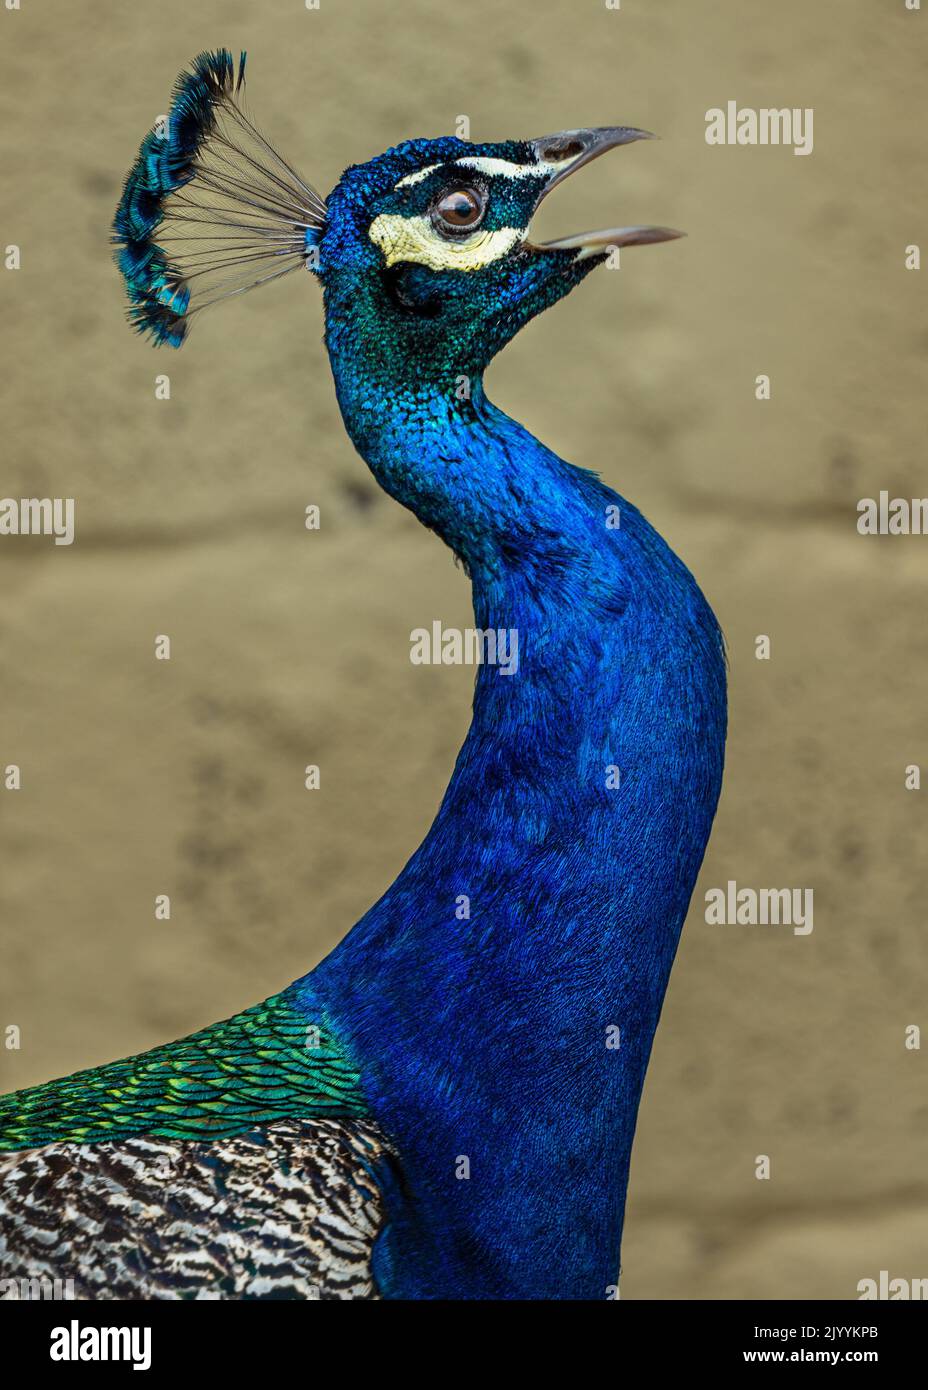 Profile view of a peacock squawking with a sandy coloured wall background Stock Photo